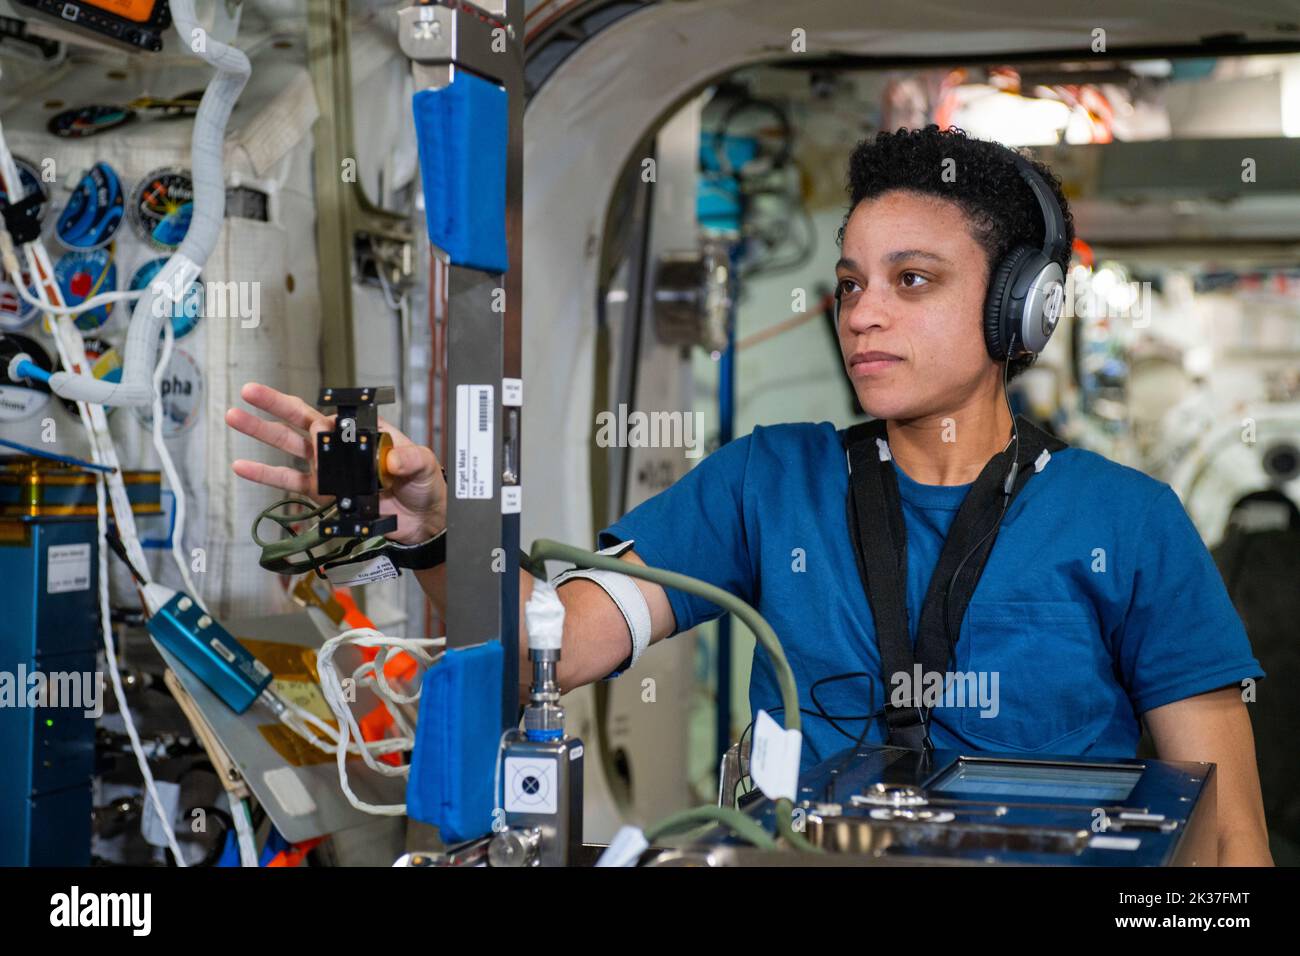 ISS - 06 July 2022 - NASA astronaut and Expedition 67 Flight Engineer Jessica Watkins is seated inside the Columbus laboratory module participating in Stock Photo